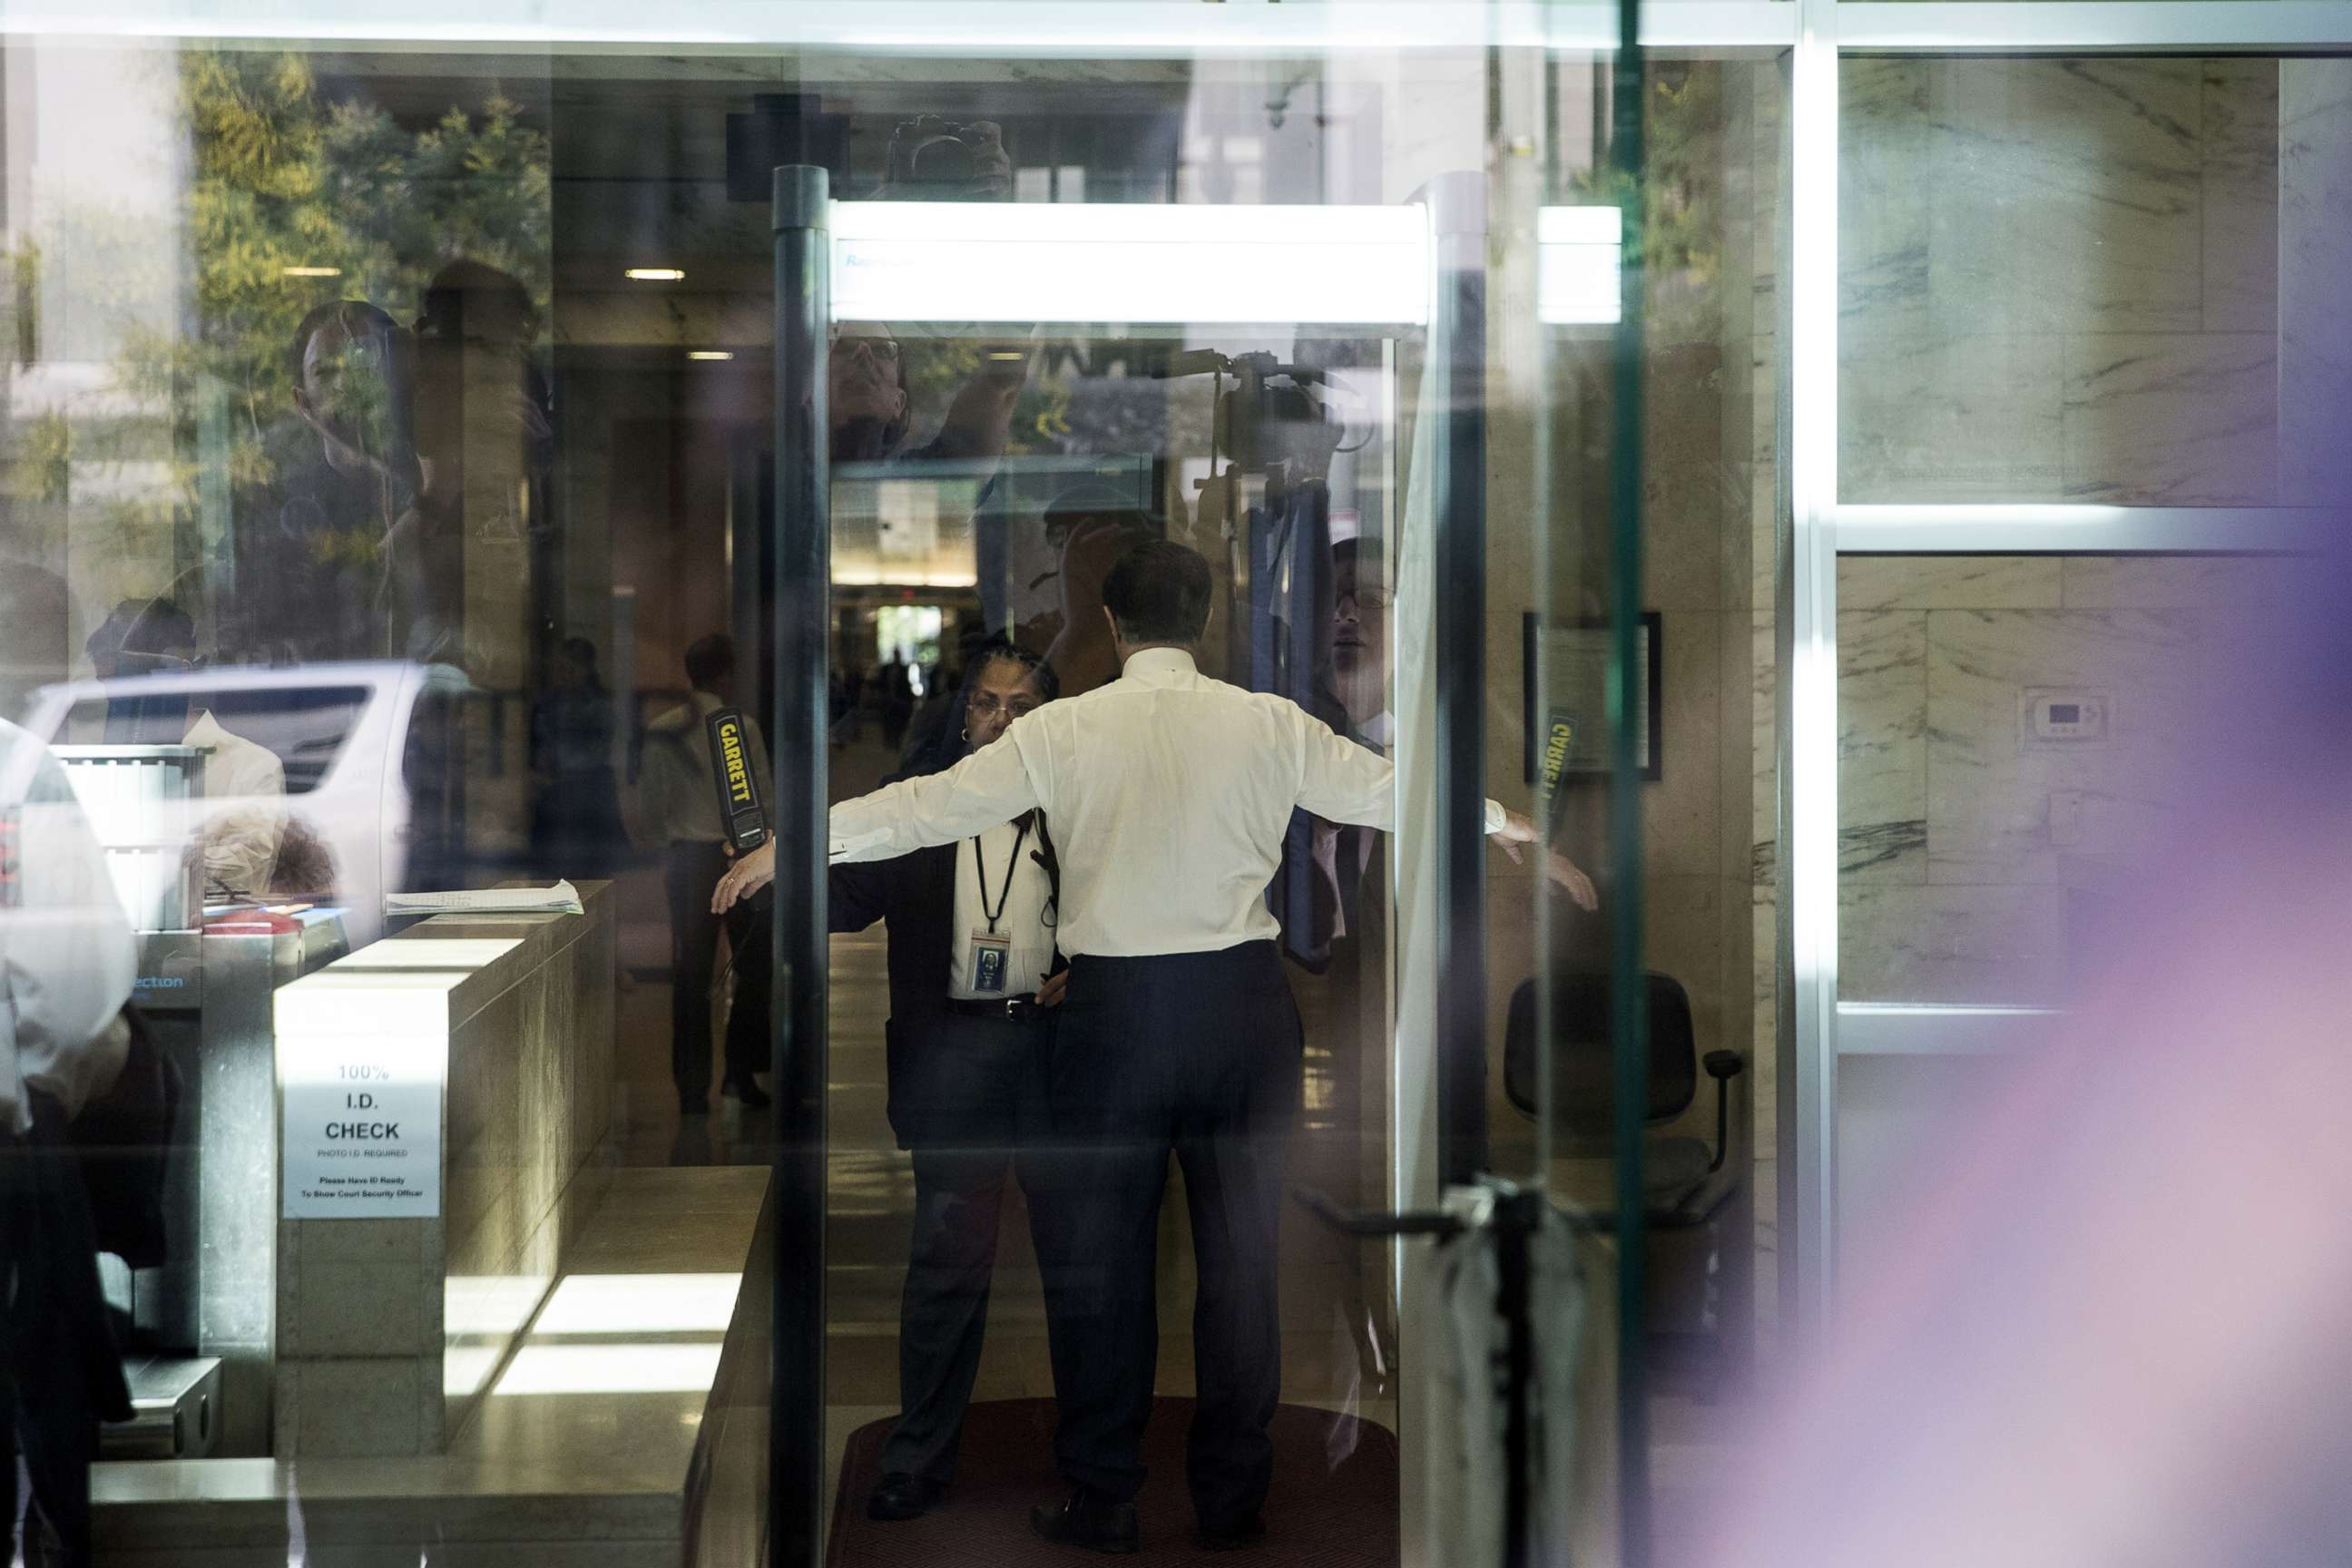 PHOTO: Former Trump campaign manager Paul Manafort walks through security at the William B. Bryant Annex to the E. Barrett Prettyman U.S. Courthouse on June 15, 2018 in Washington, D.C.